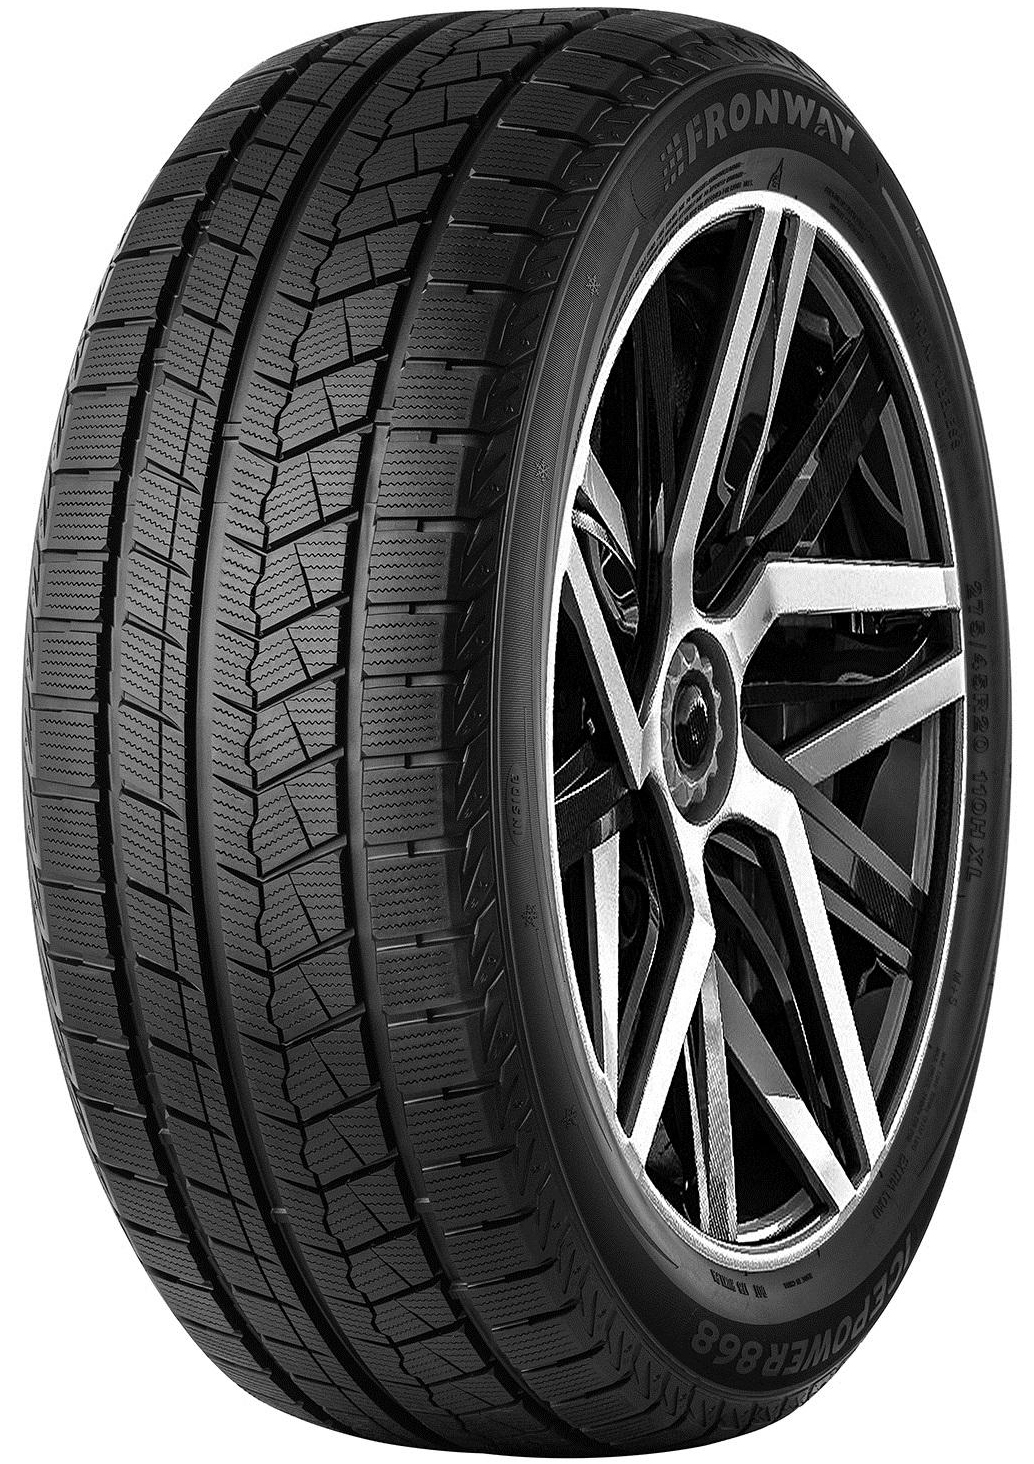    Fronway Icepower 868 225/60 R17 